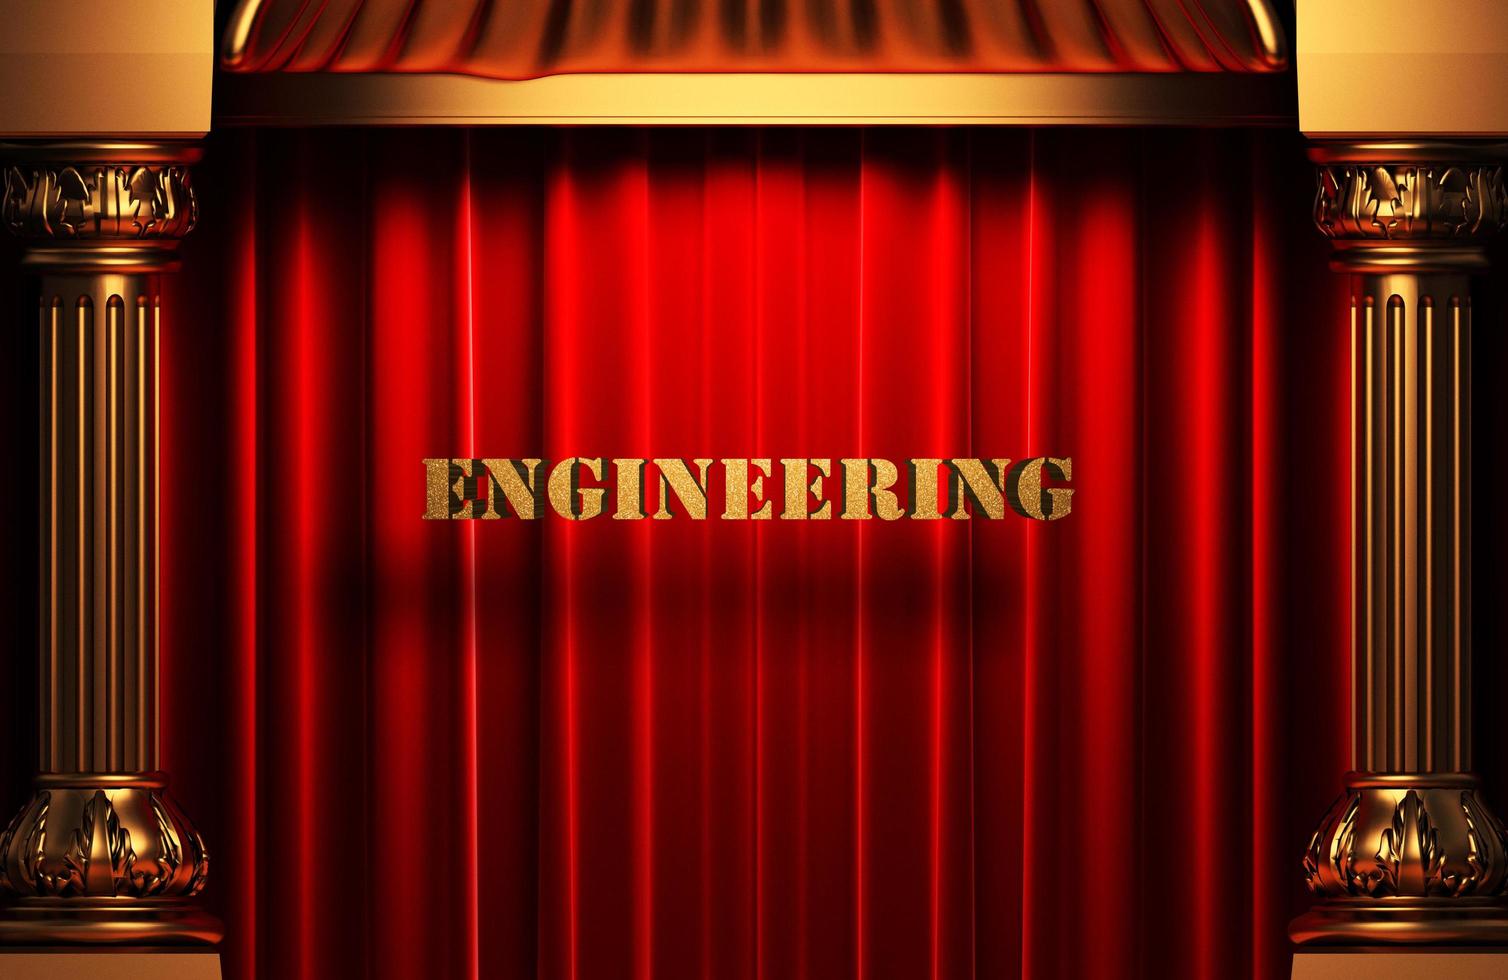 engineering golden word on red curtain photo